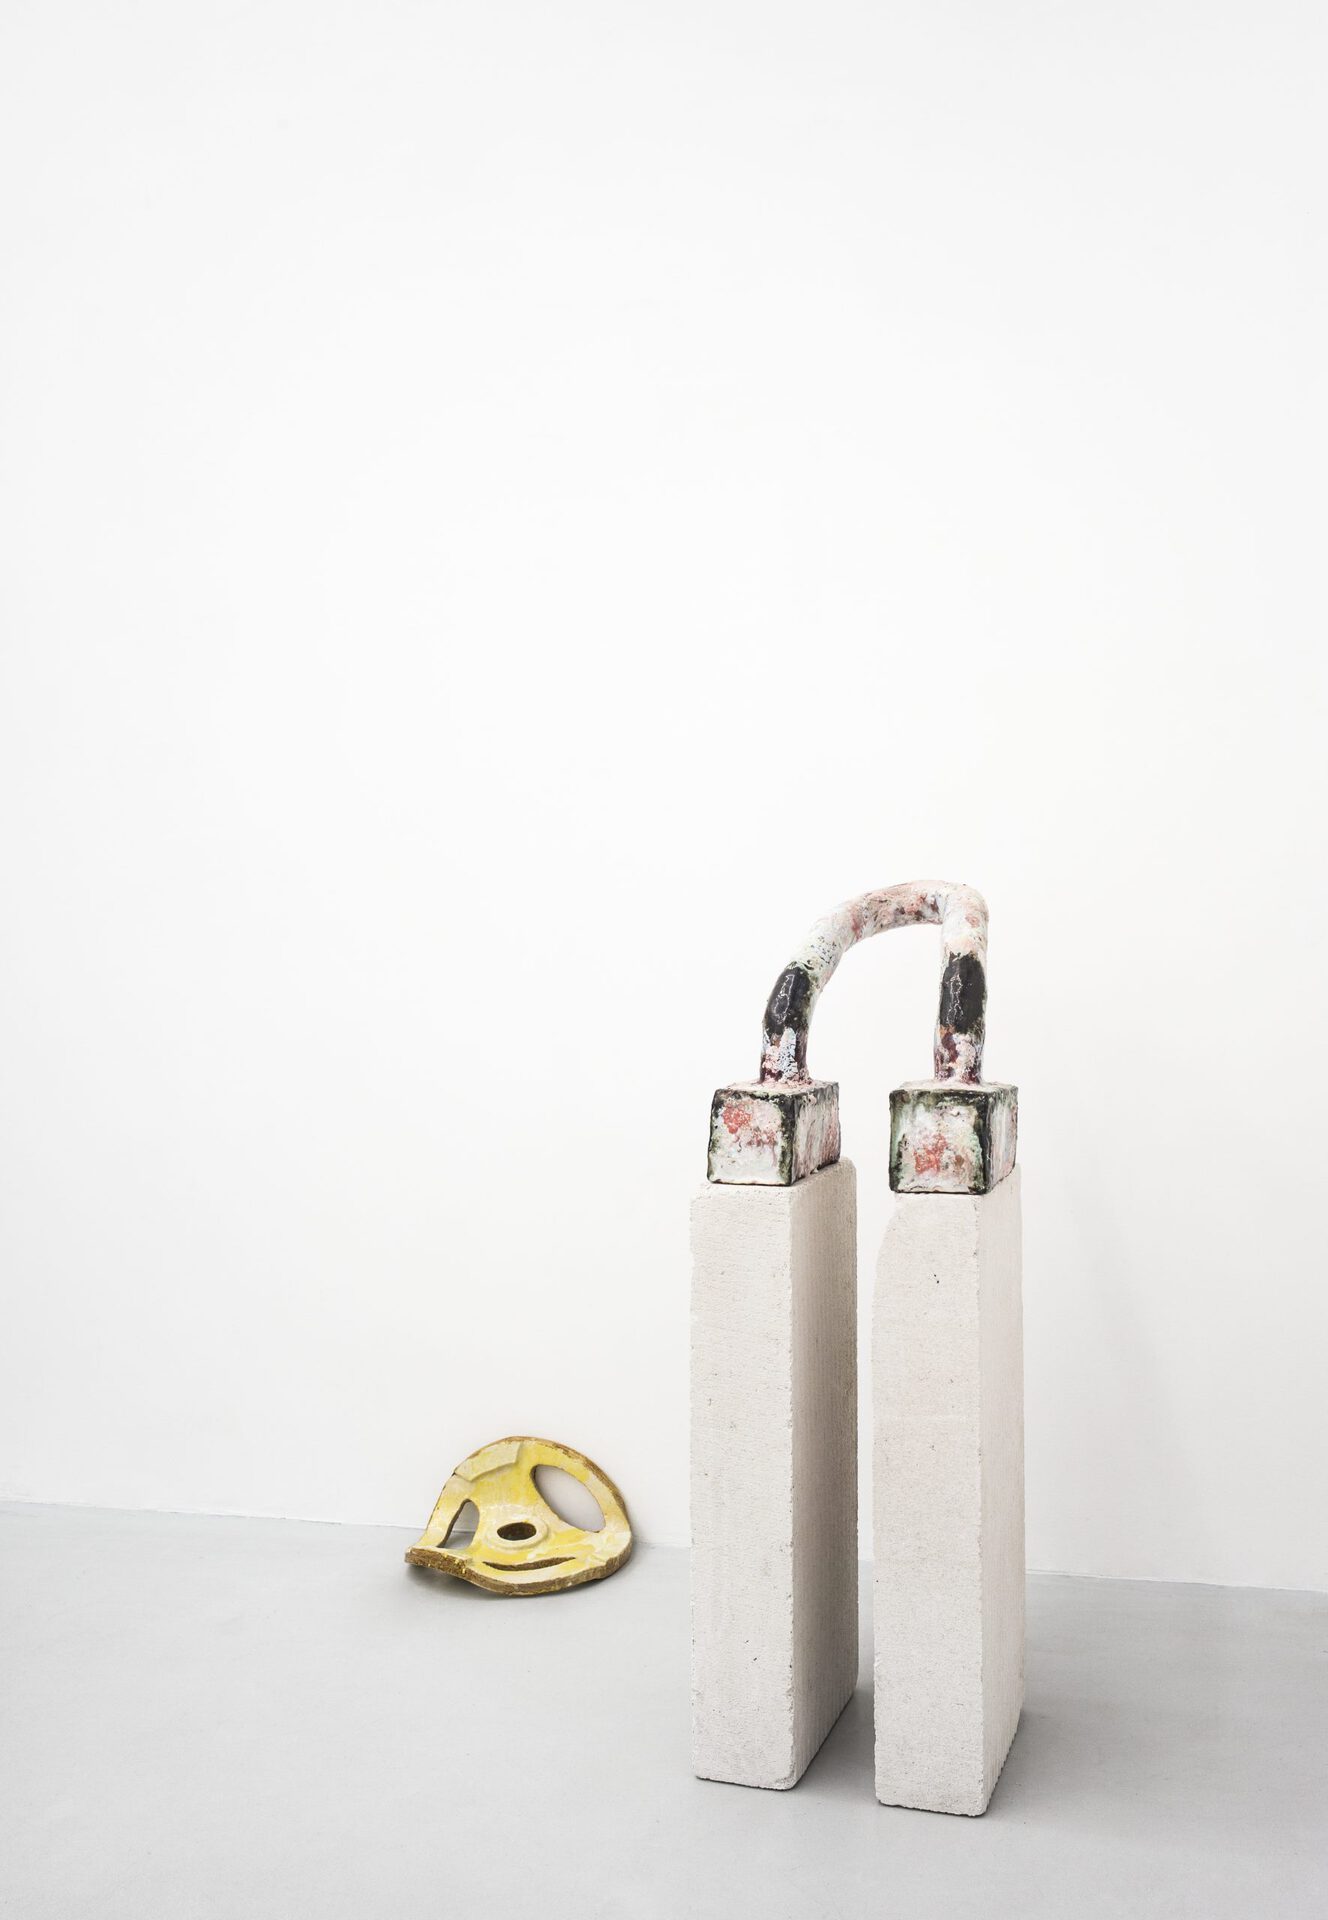 Harry Hachmeister, untitled (yellow) and Squad Baroque, glazed ceramics, installation view, 2020